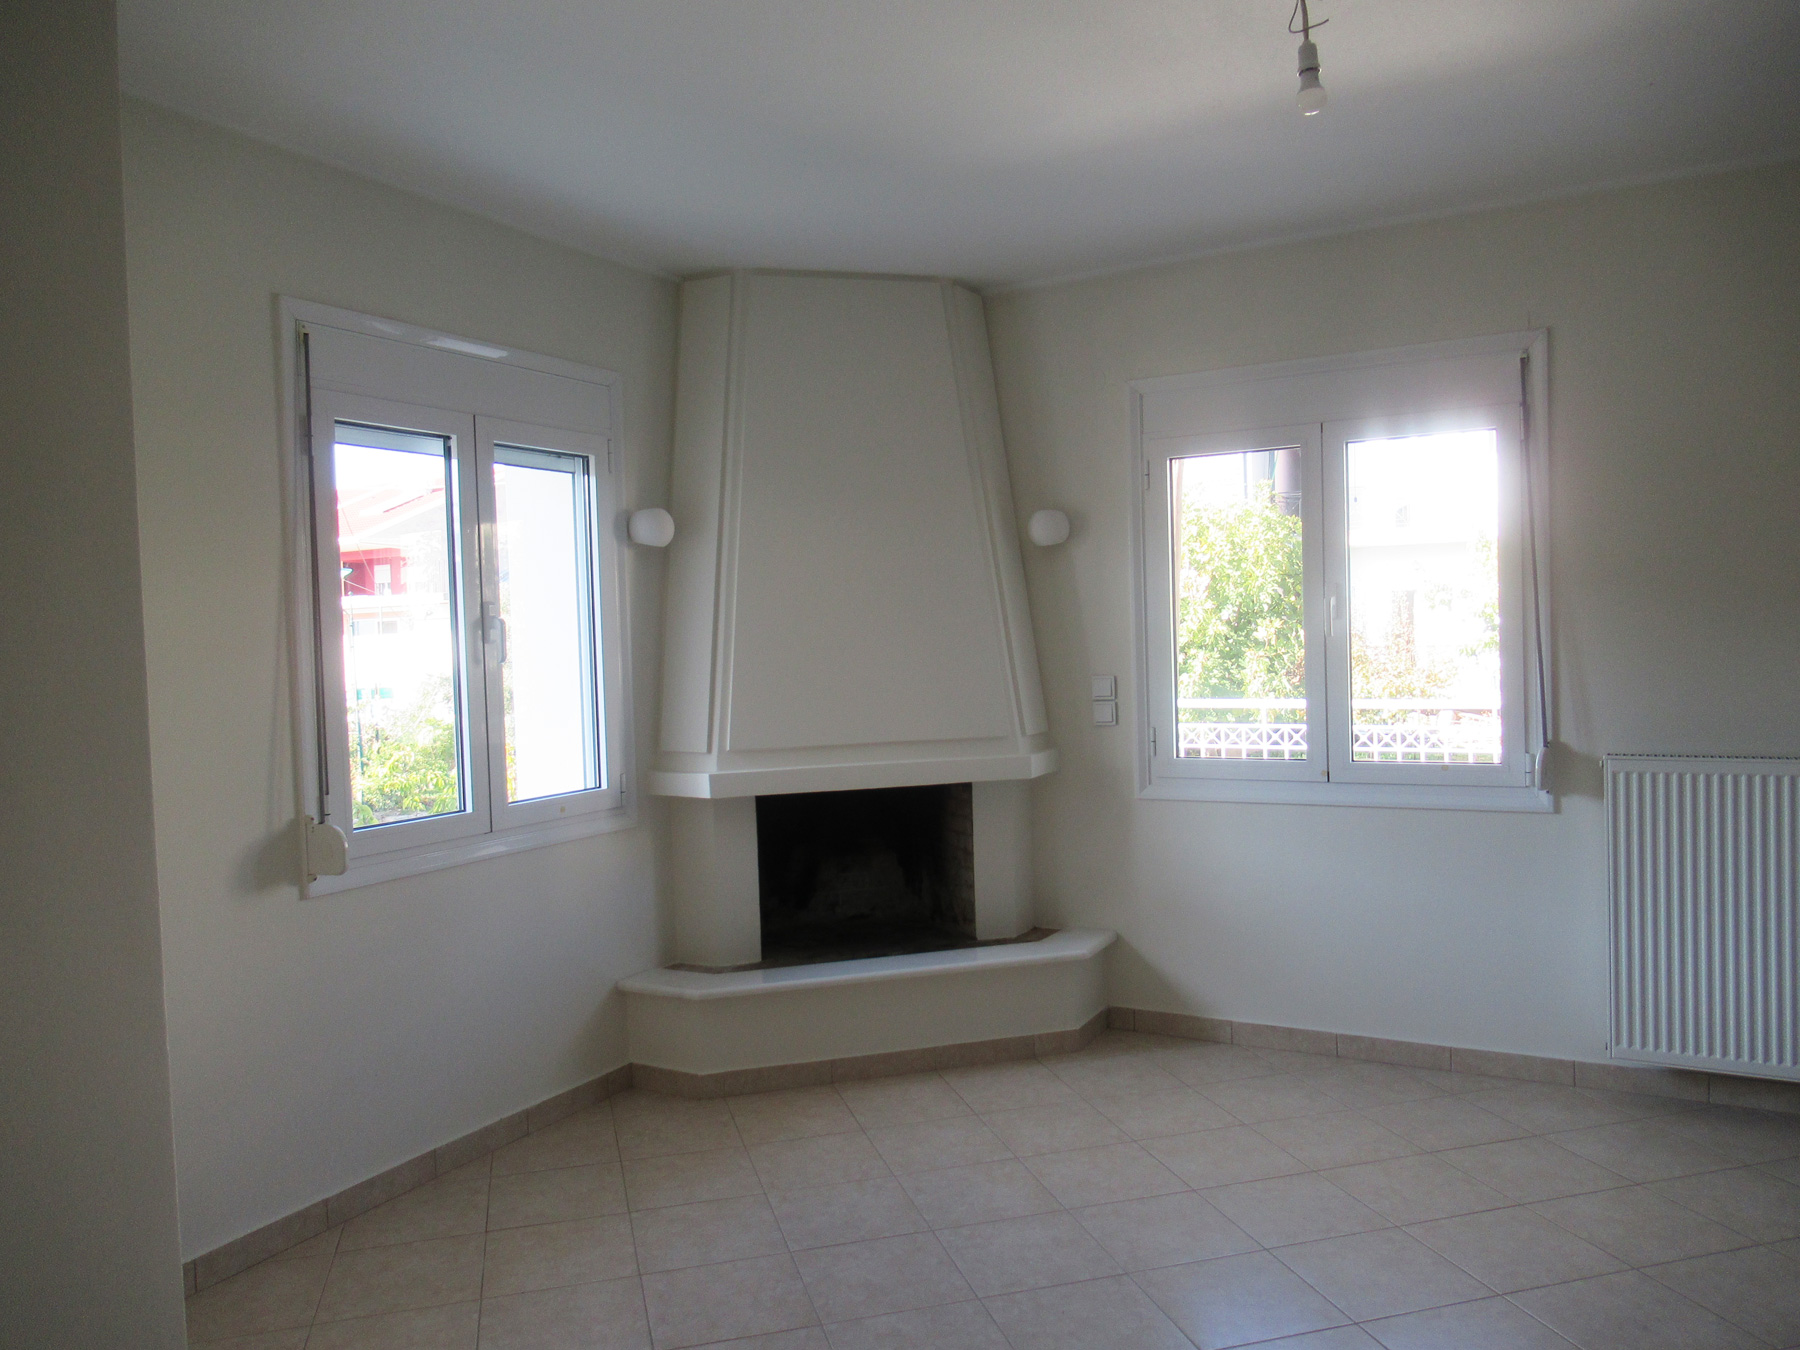 For rent newly built maisonette with 4 bedrooms, 170 sq.m. in Anatoli in Ioannina.